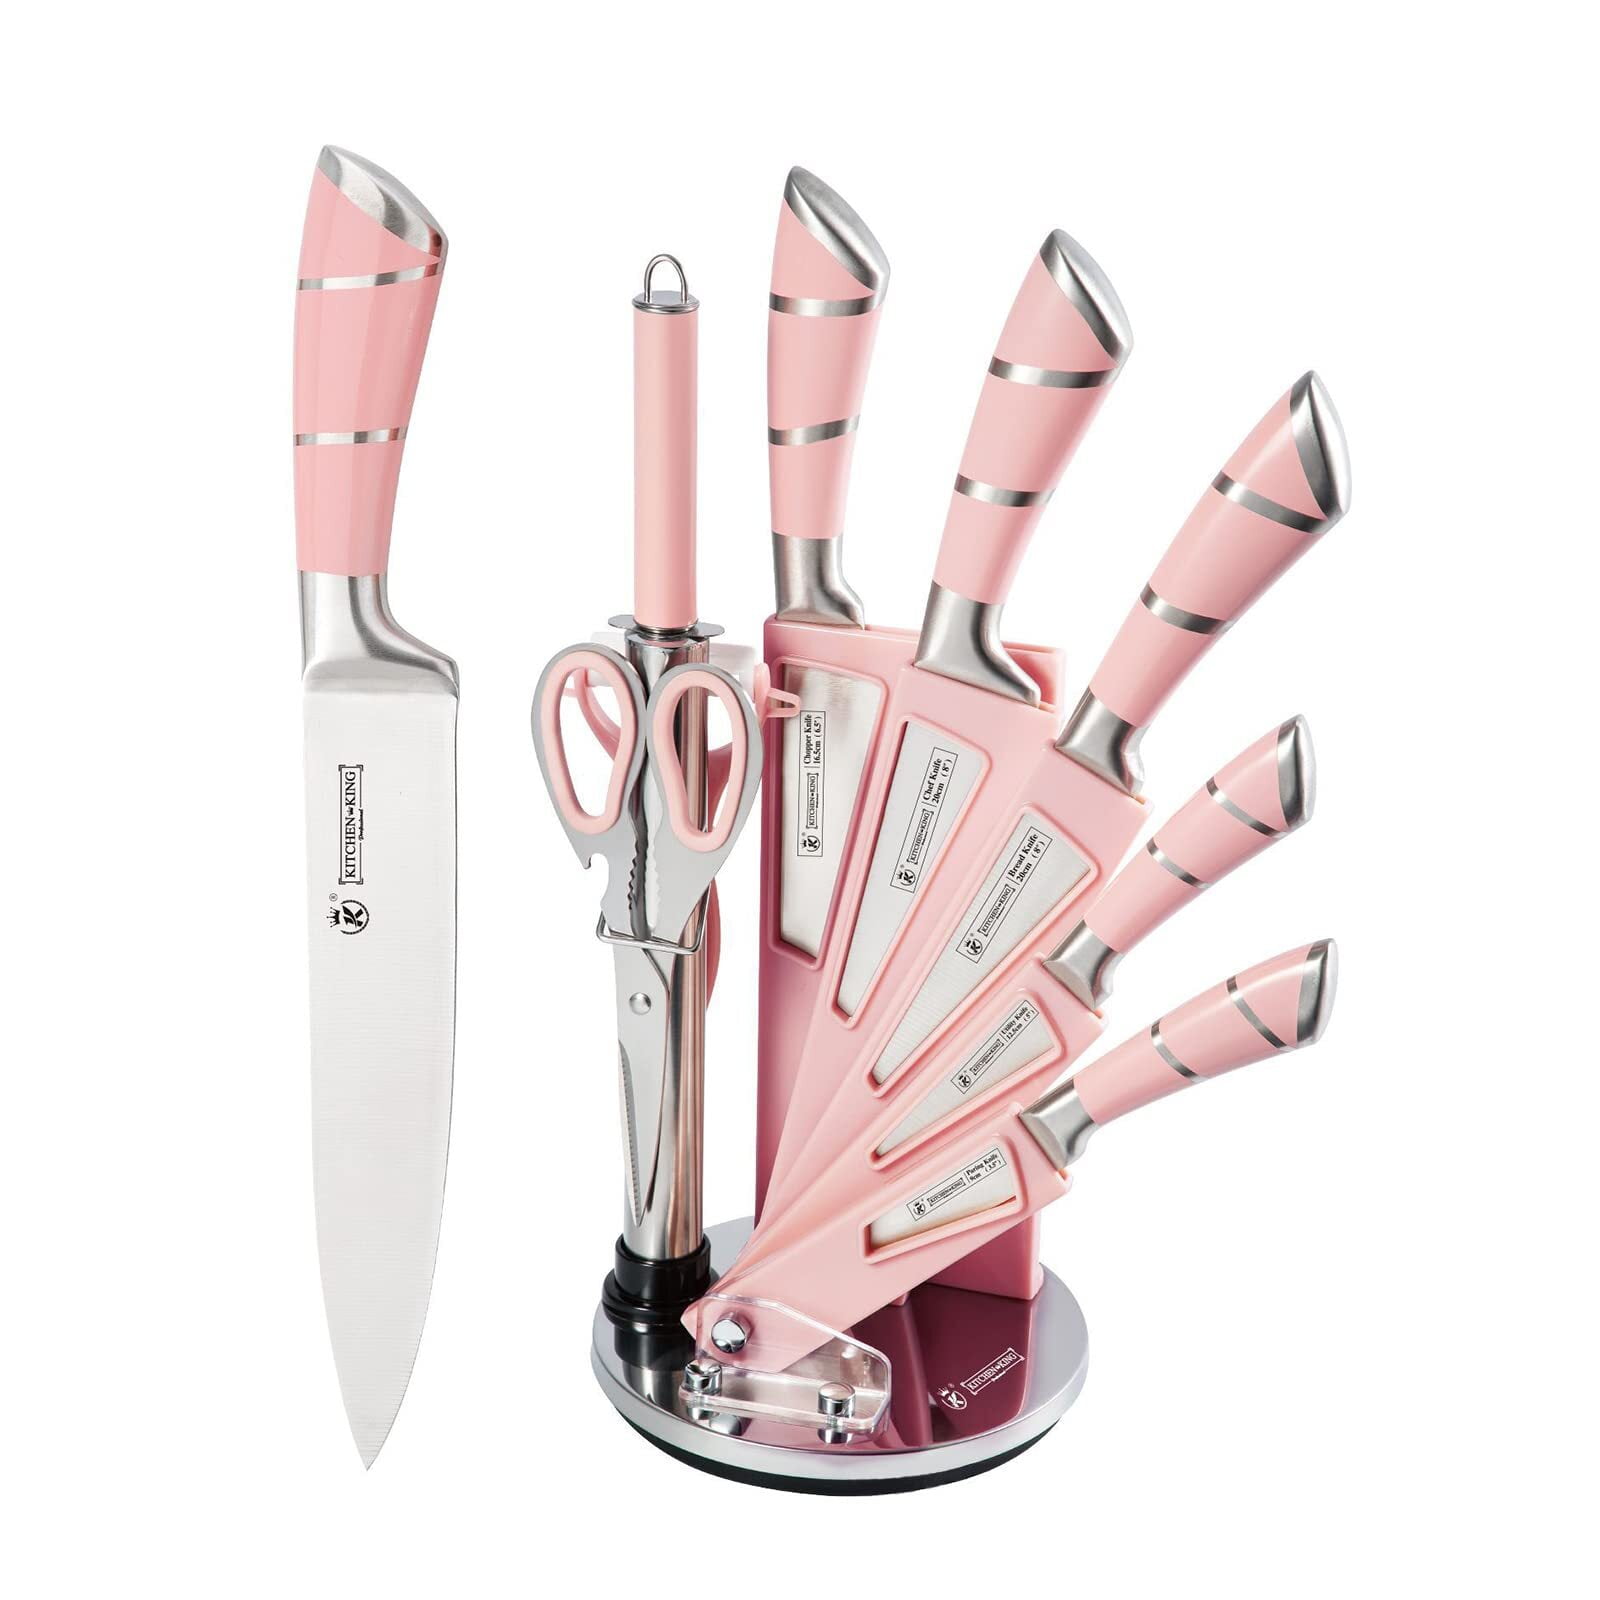 Kitchen Knife Set, YF-TOW 9pcs Stainless Steel Knife Sets for Kitchen with Block, Sharp, Non-Slip, Gradient Colour, Chef Knife, Peel Cutter, Etc